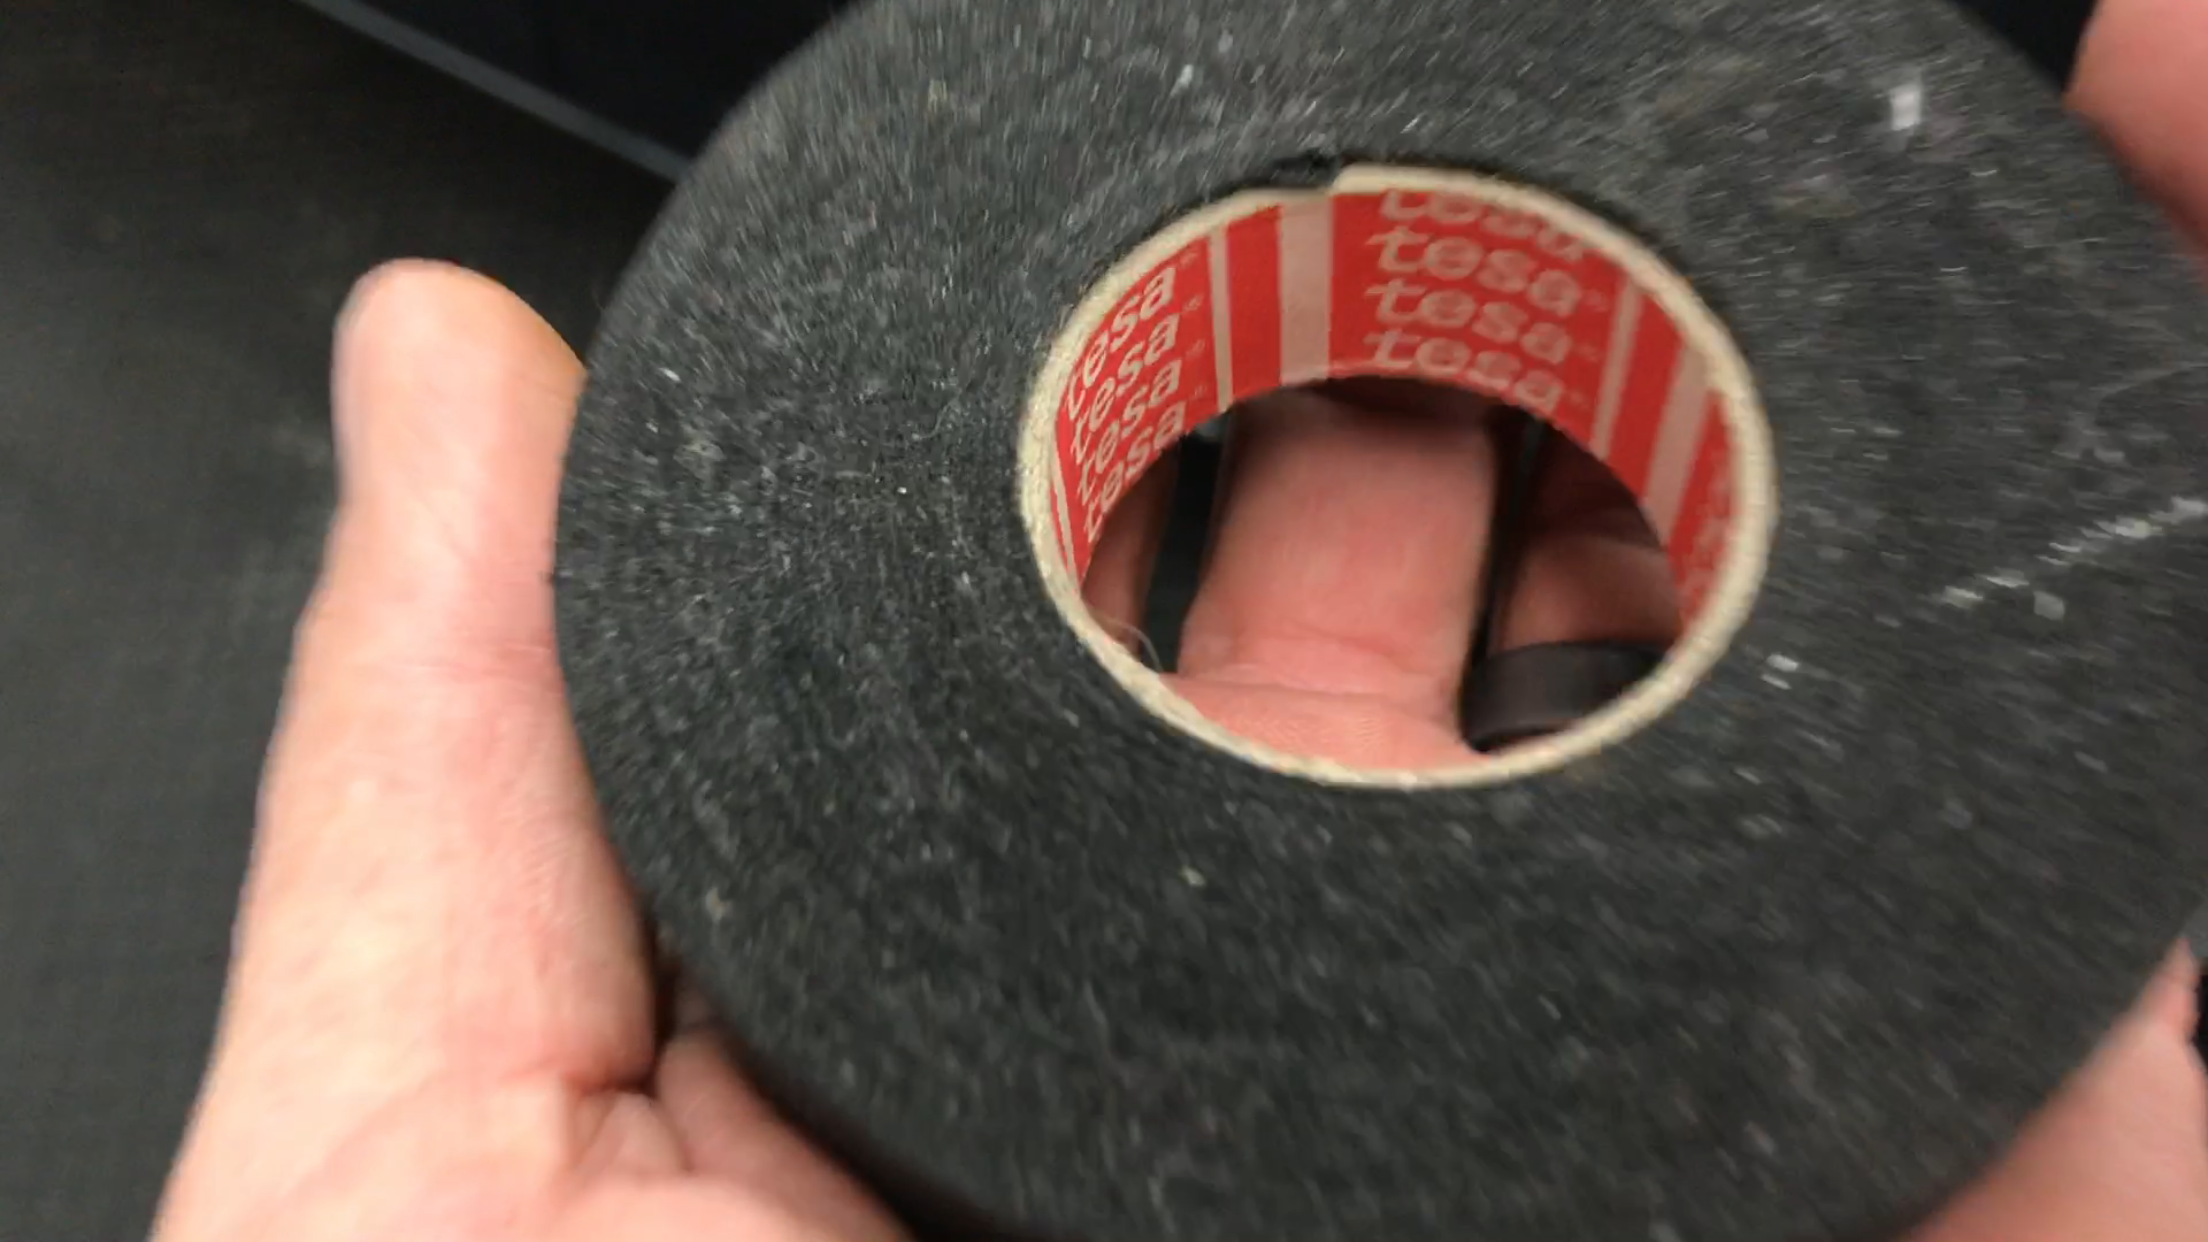 Tesa tape, can not be torn, this is high grade tape and used mostly by professionals, http://217dent.com Springfield, IL Used in video of 2011 Toyota Camry, to cover tool.